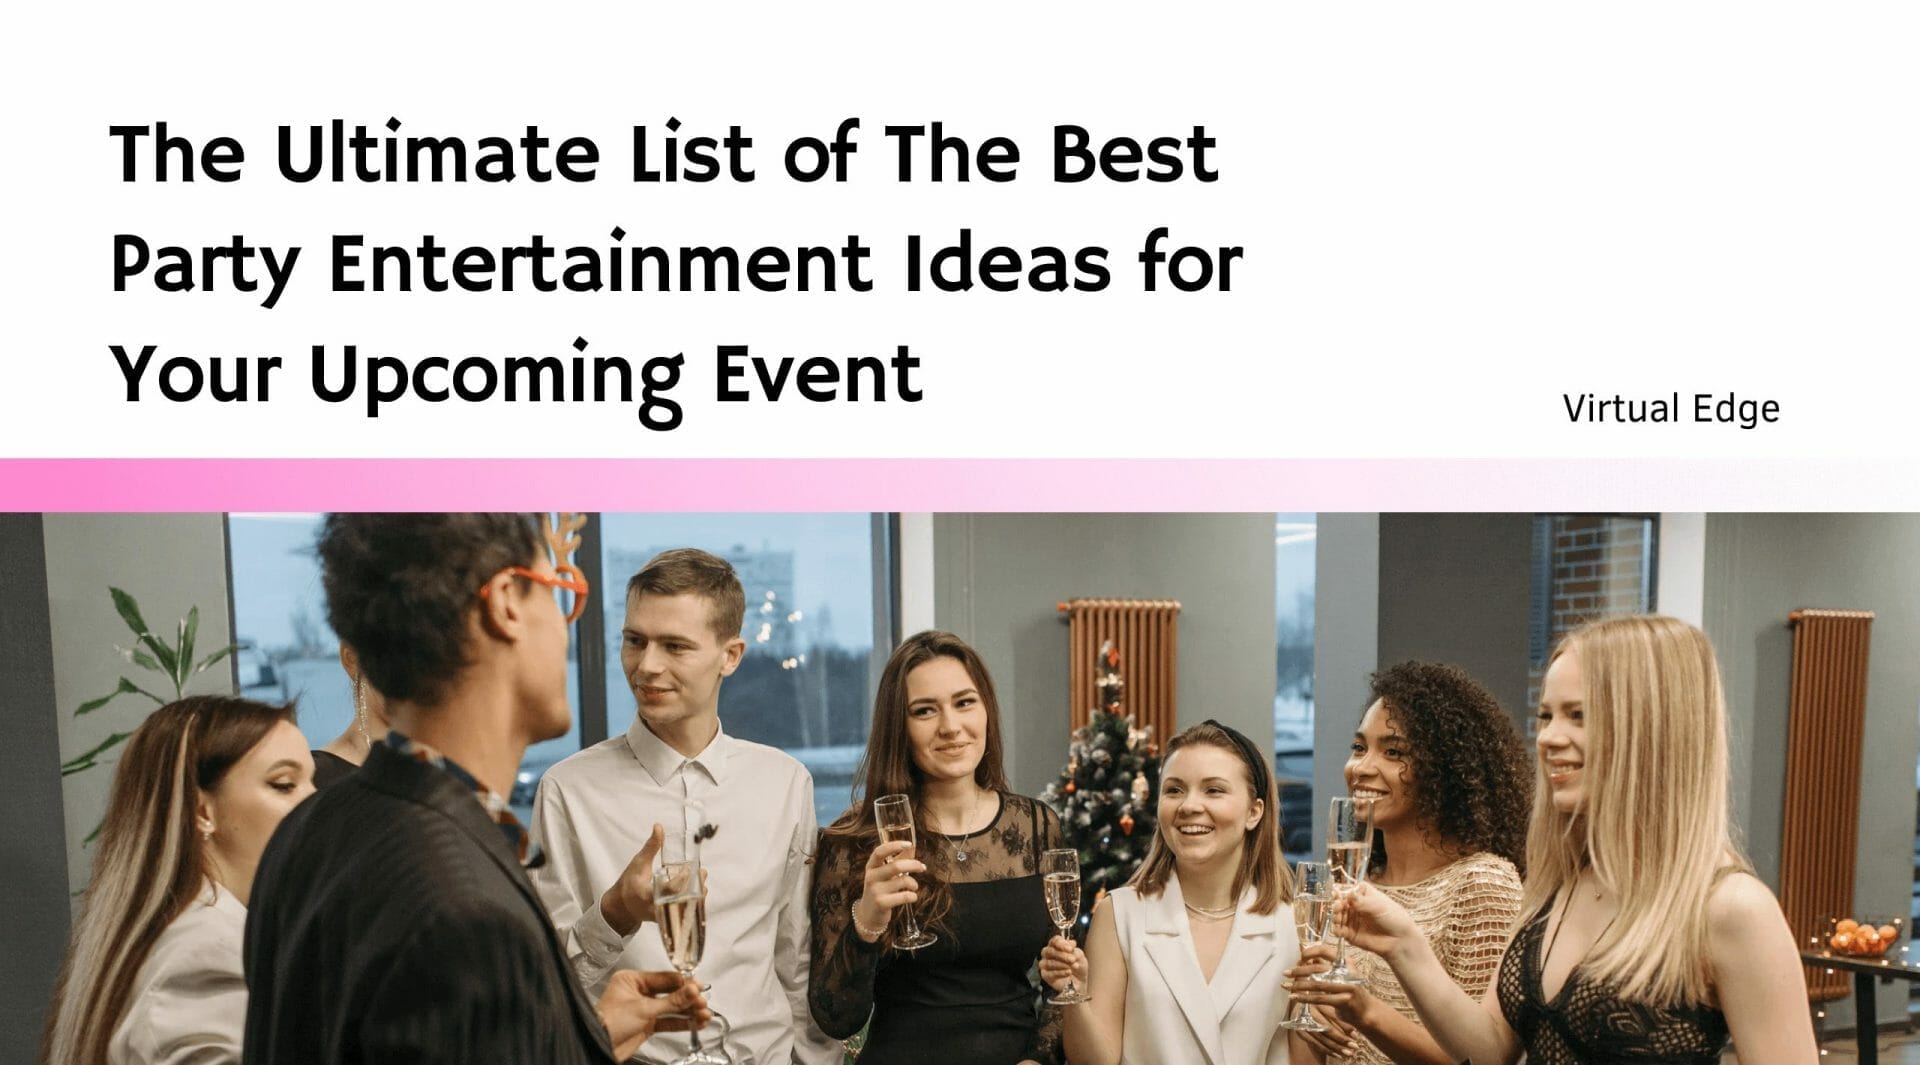 The Ultimate List of The Best Party Entertainment Ideas for Your Upcoming Event